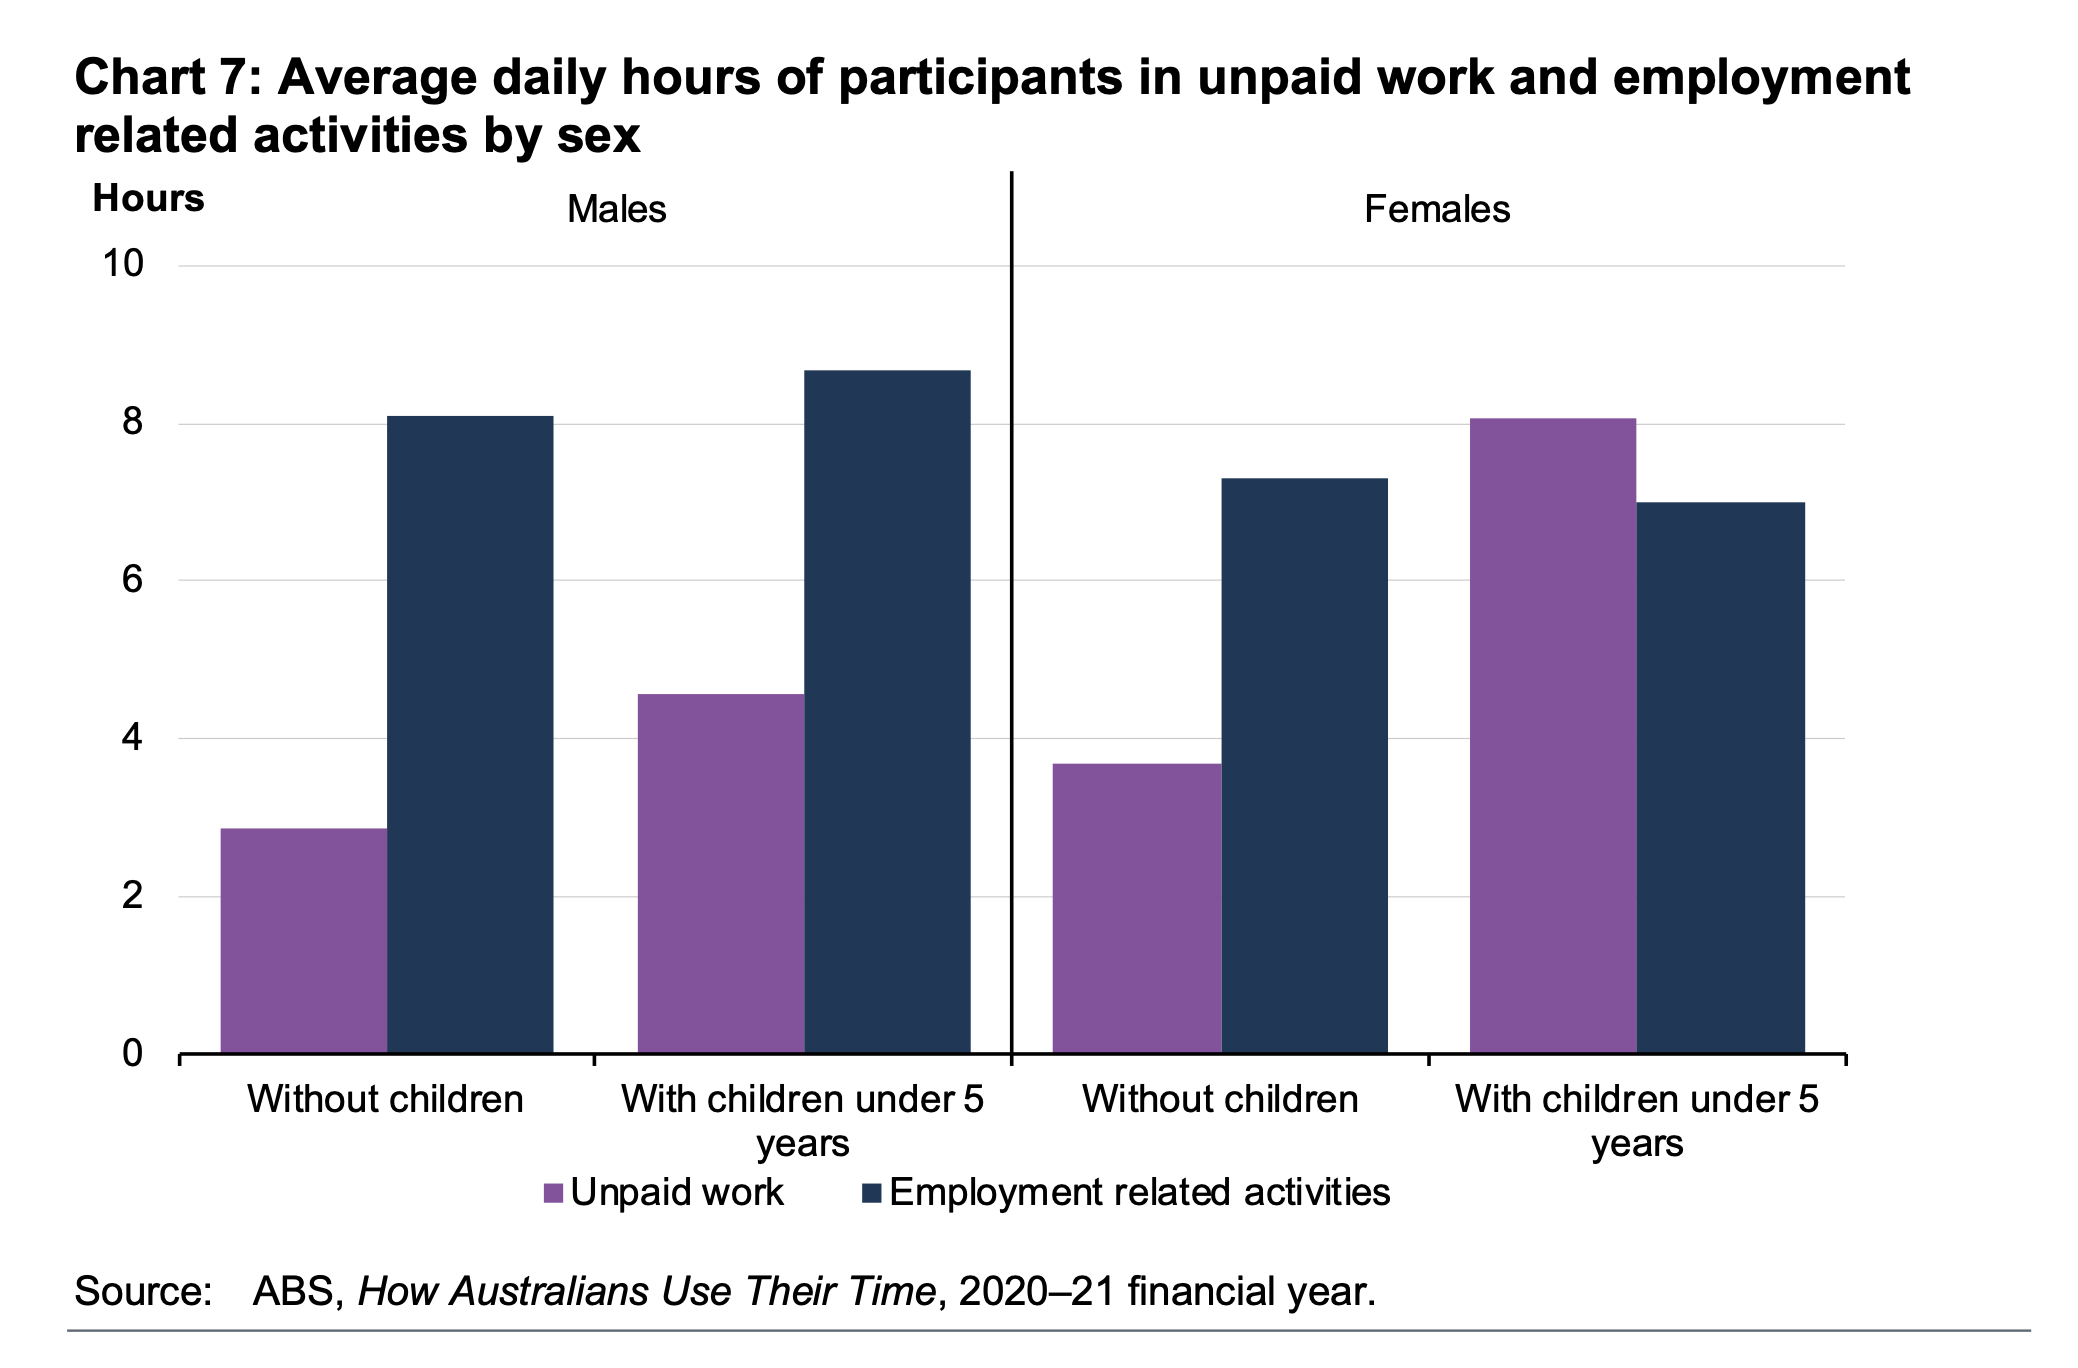 Column graphs showing daily hours of participants in unpaid work and employment related activities by sex